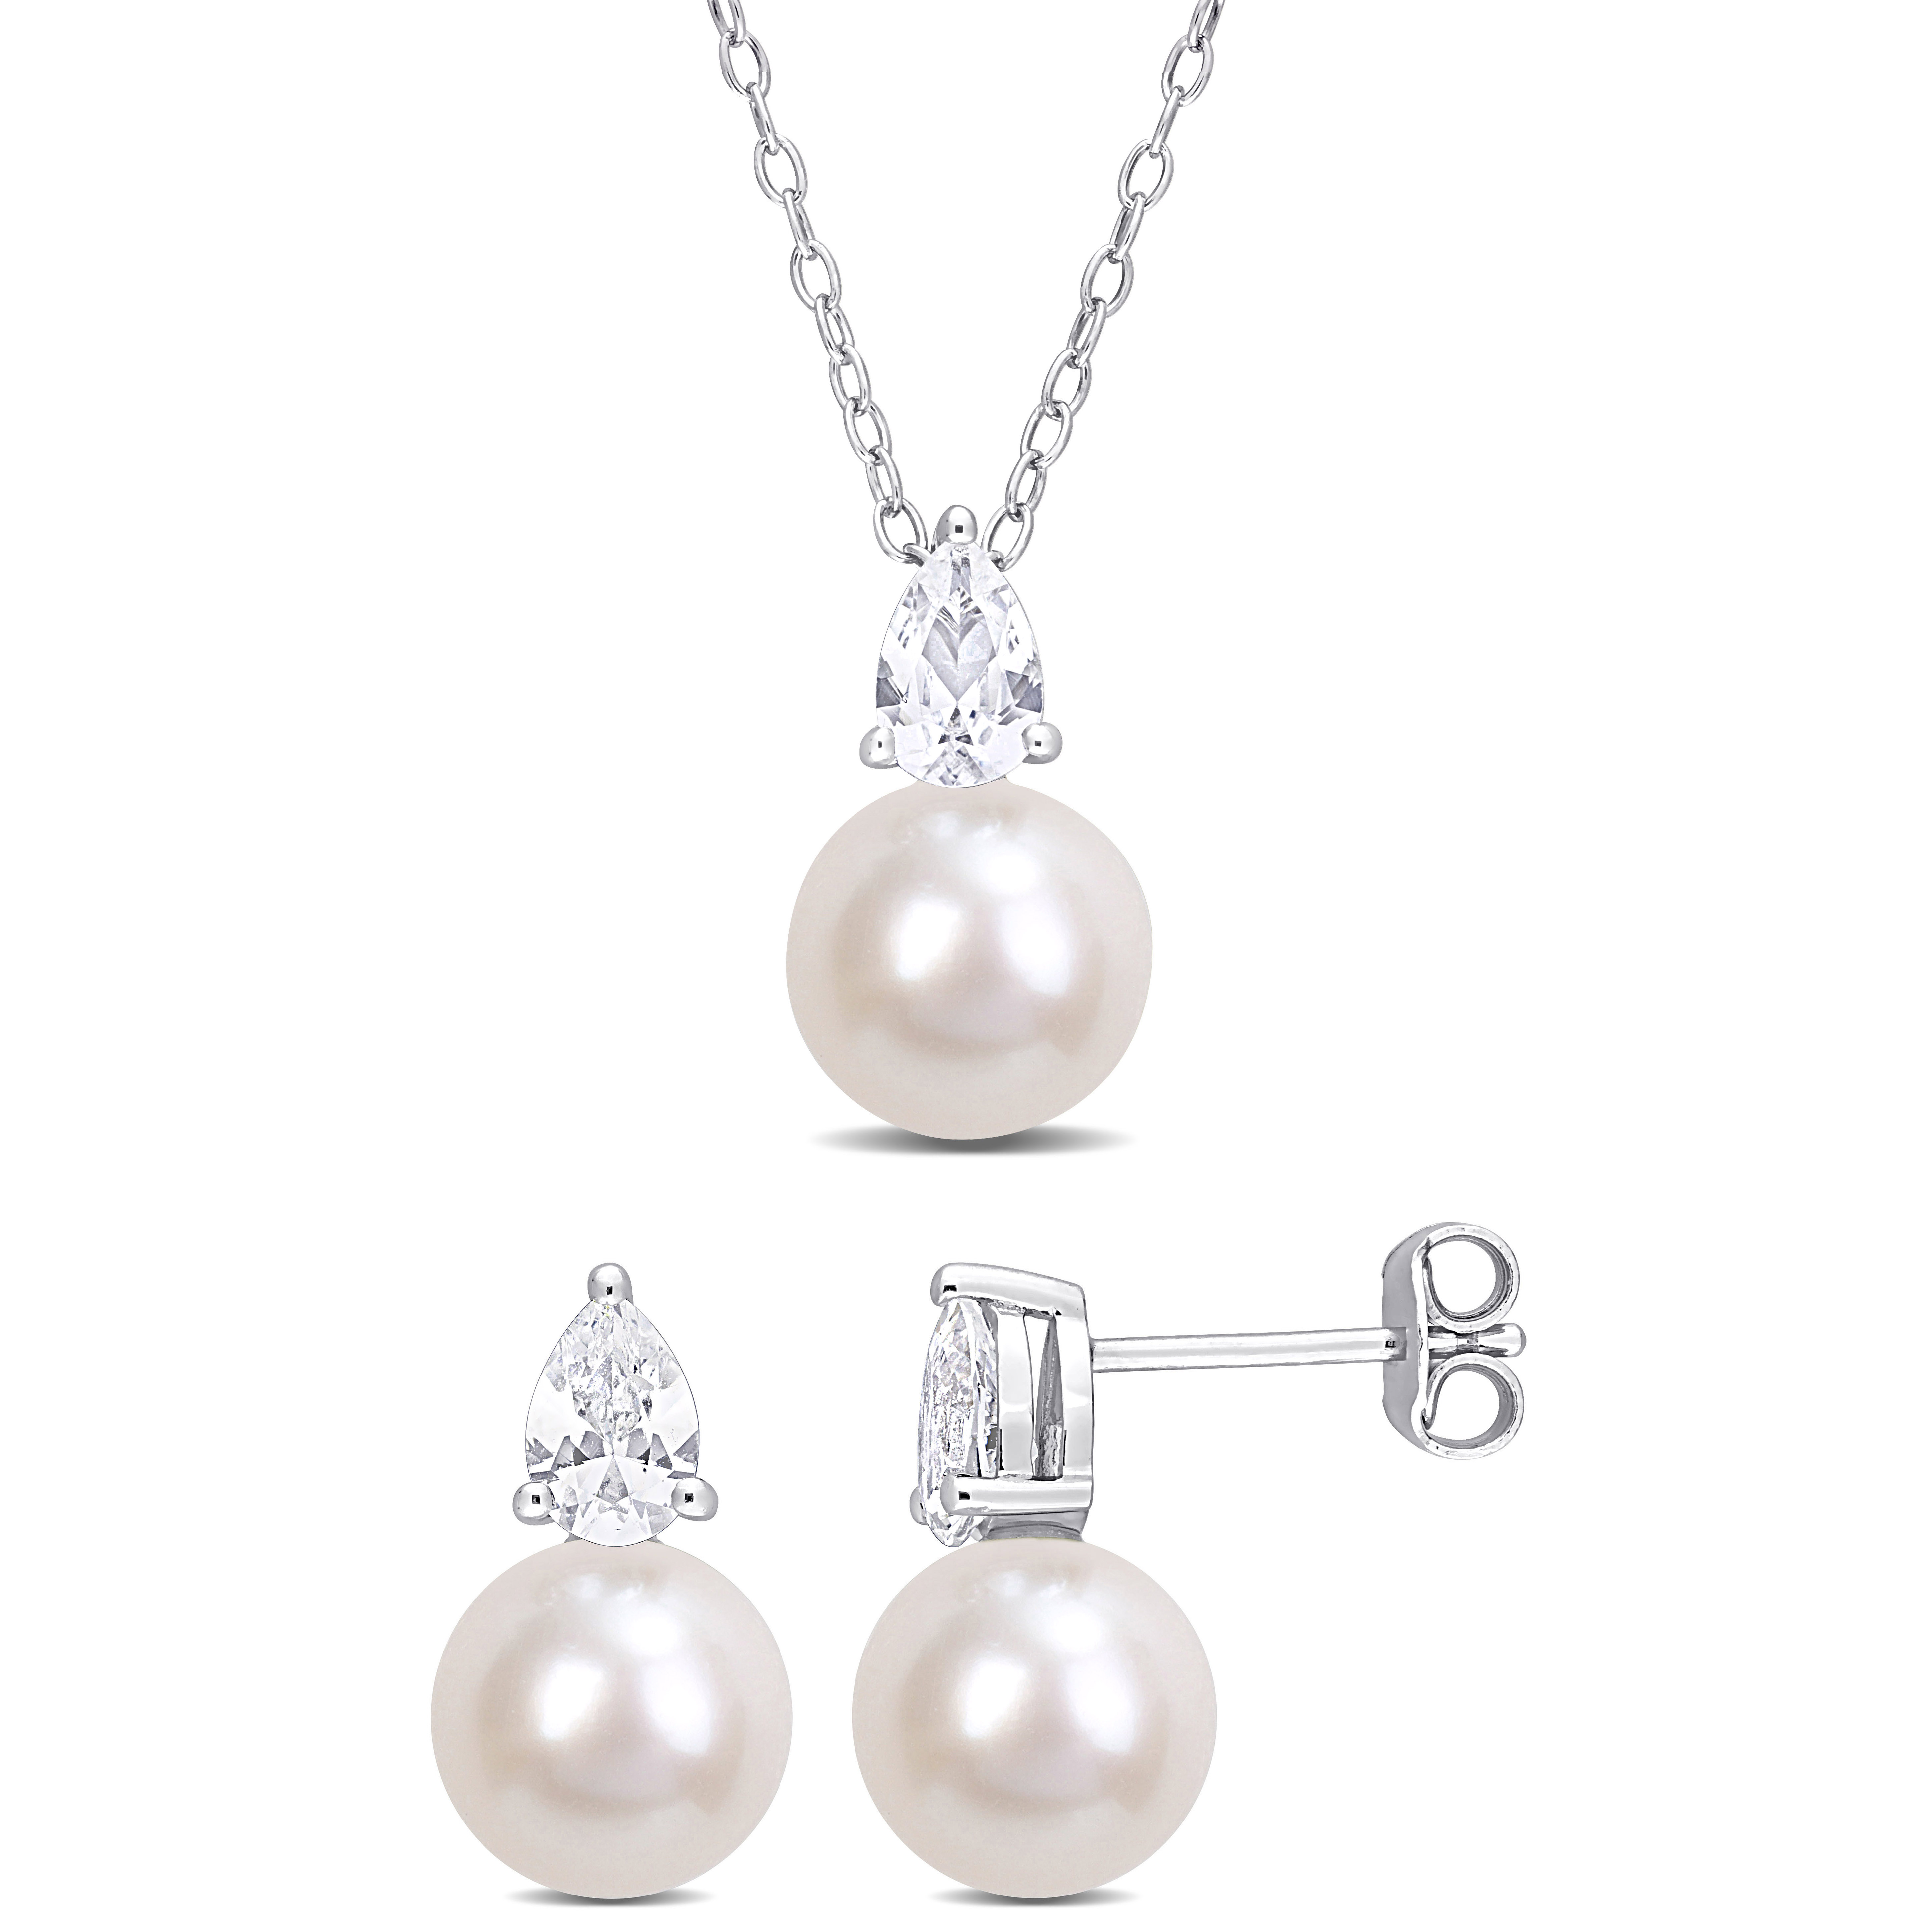 8.5-9 MM White Round Cultured Freshwater Pearl and 2 CT TGW Pear-Cut Created White Sapphire 2-Piece Drop Necklace and Earrings Set in Sterling Silver